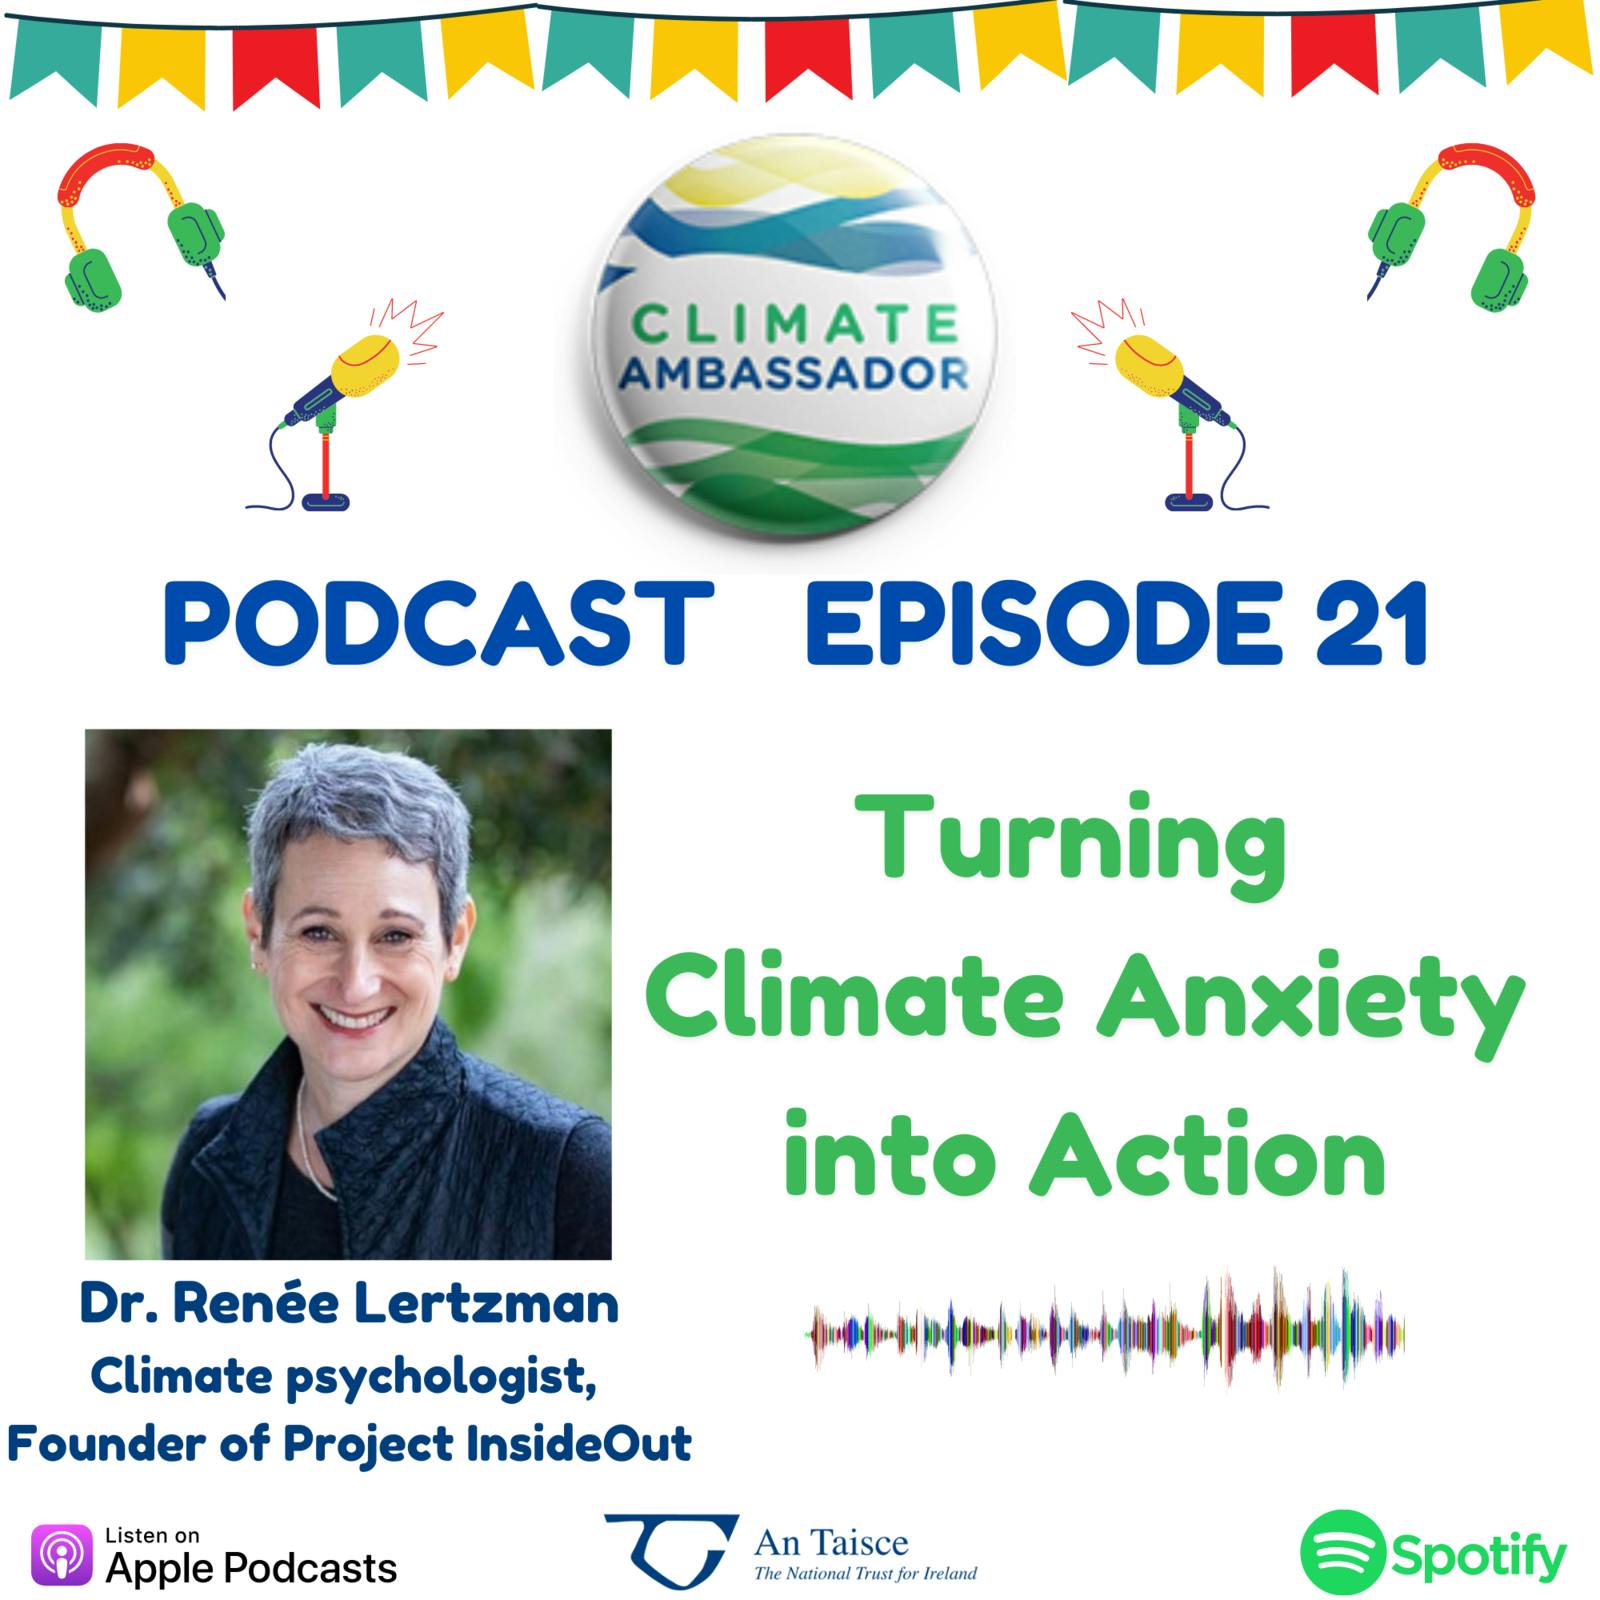 21: Podcast 21 - Turning Climate Anxiety into Action